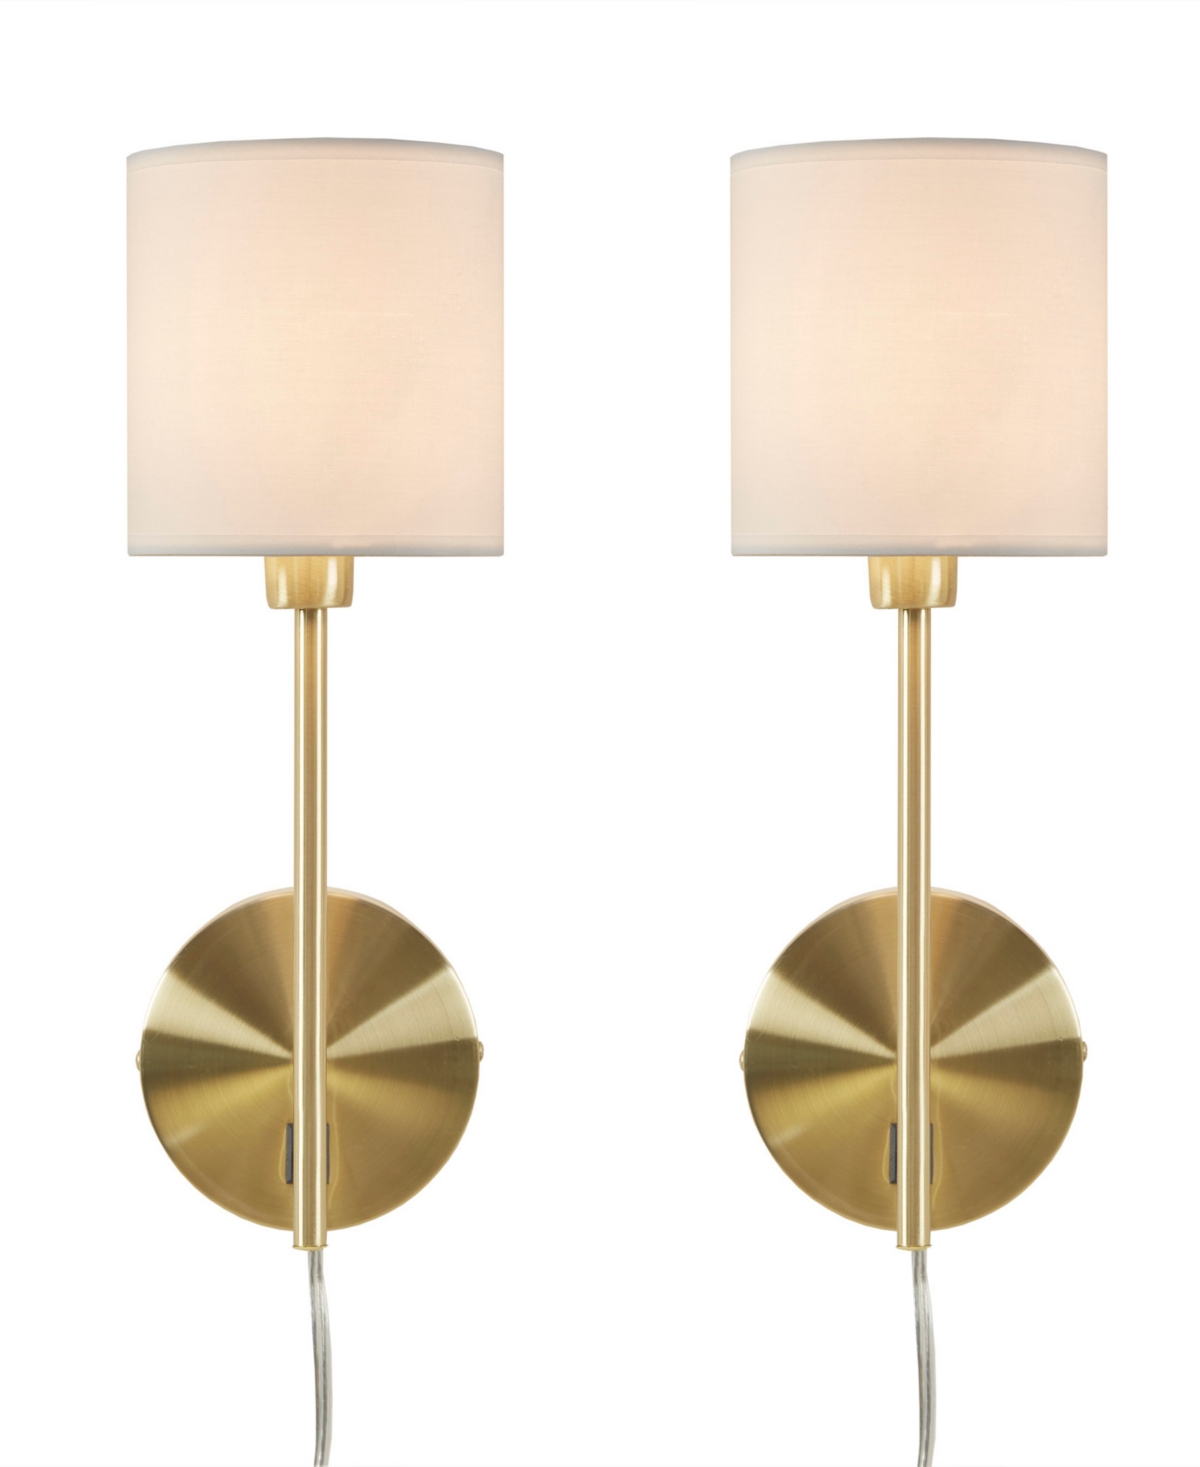 Hampton Hill Conway Metal Wall Sconce With Cylinder Shade, Set Of 2 In Gold